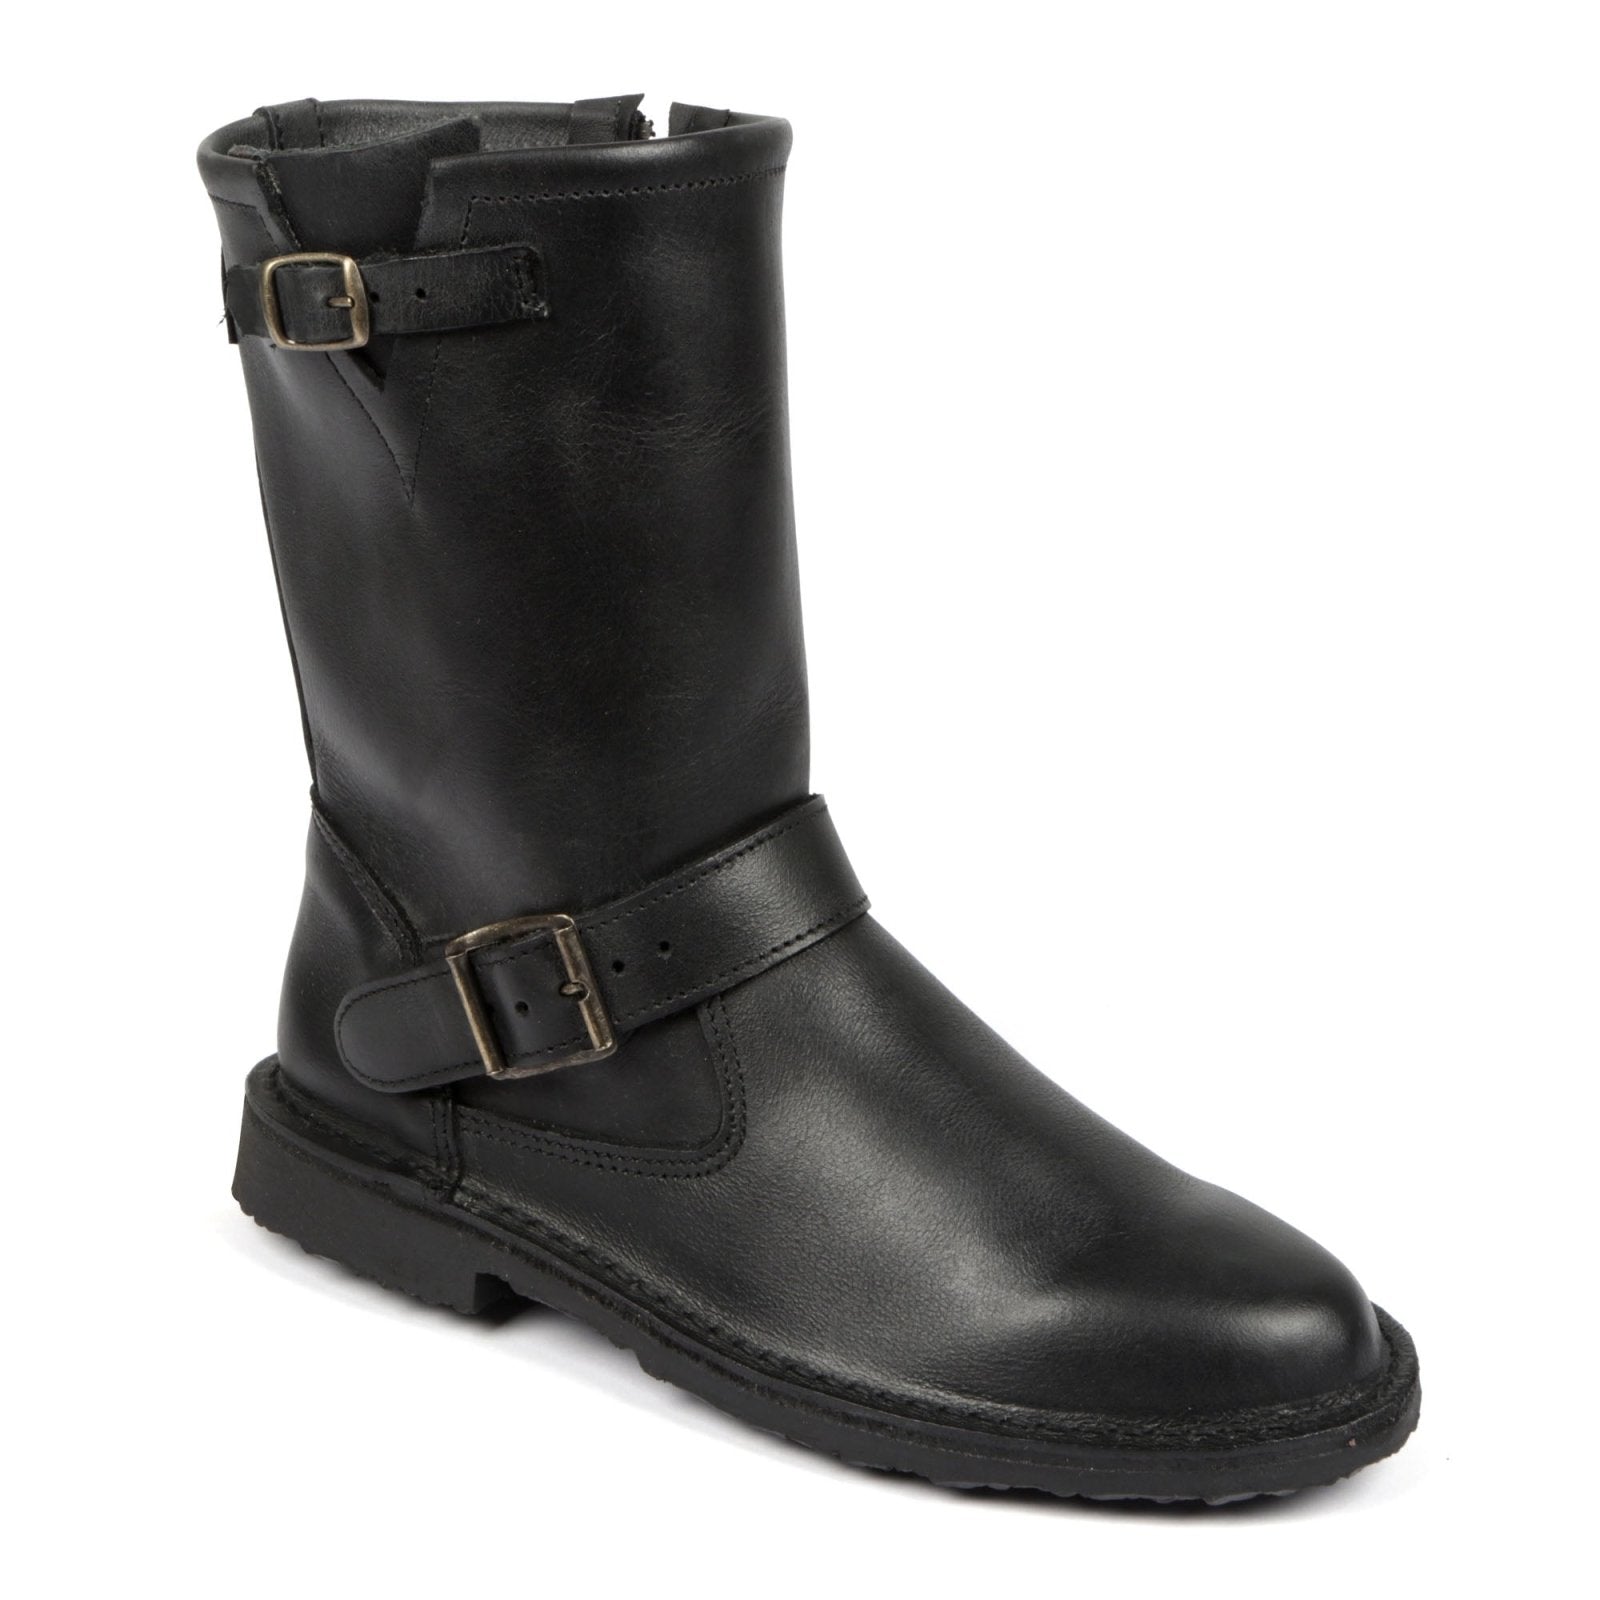 Claire Ladies Rigger Premium Leather Boot - Freestyle SA Proudly local leather boots veldskoens vellies leather shoes suede veldskoens